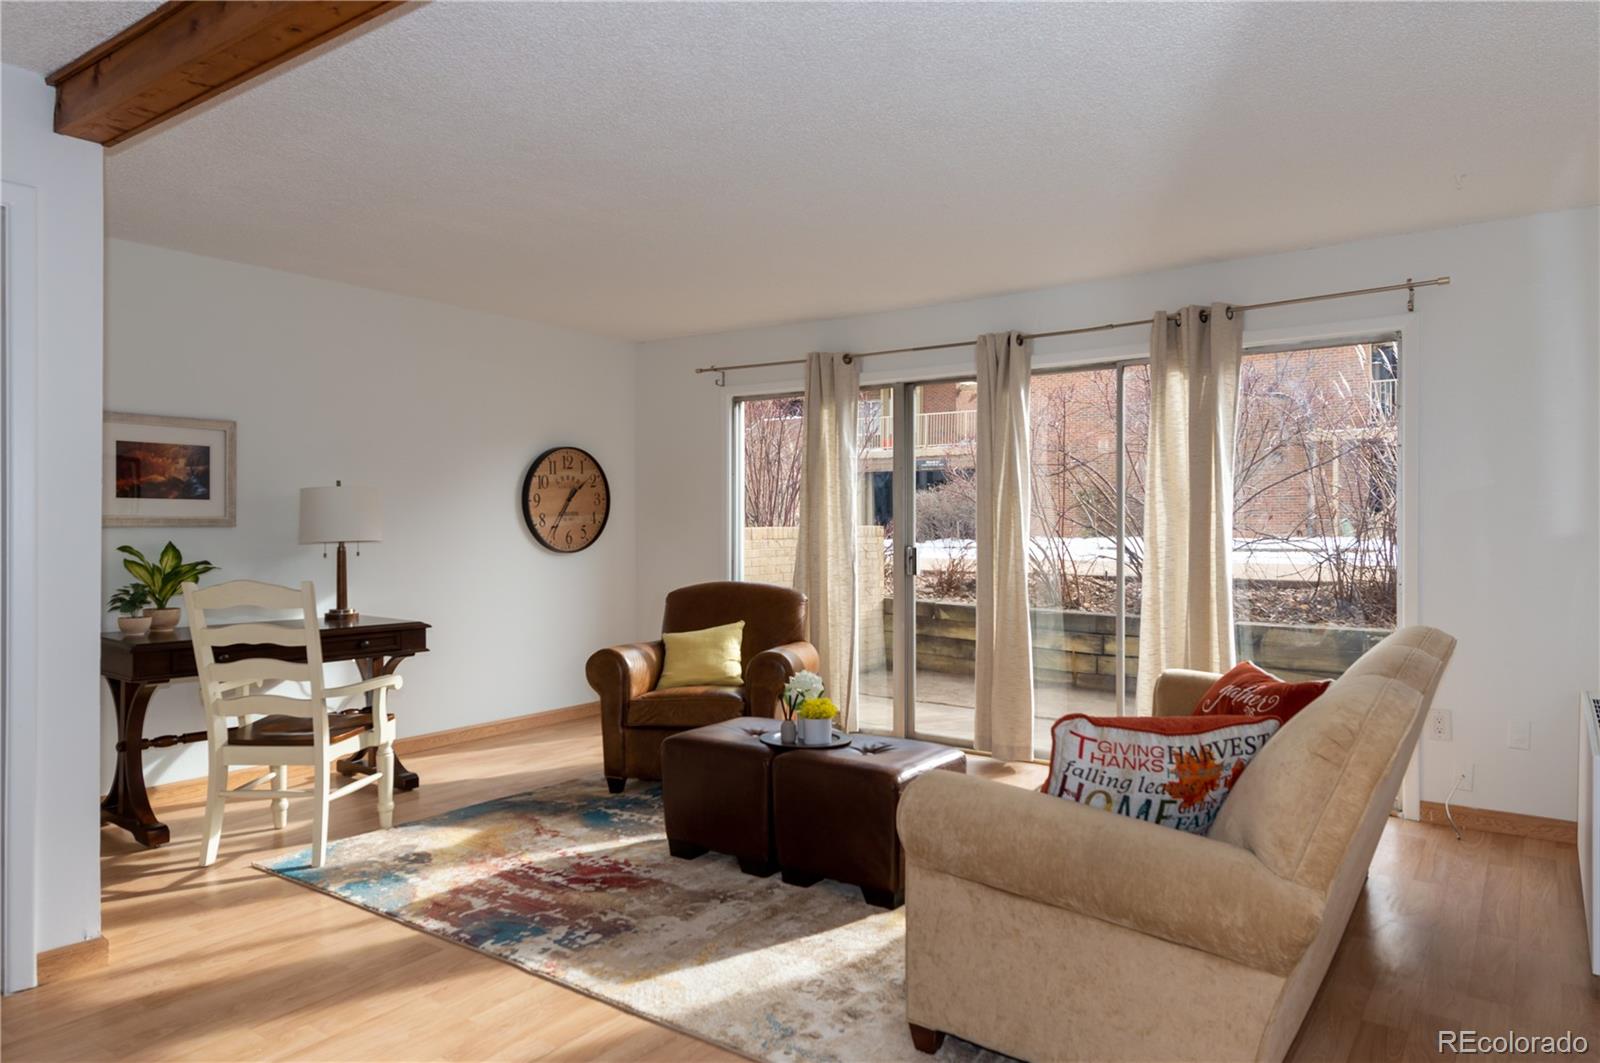 Perfect floor plan! South-facing living area enjoys natural sunlight all day! Big sliding door and picture windows brighten the whole home.